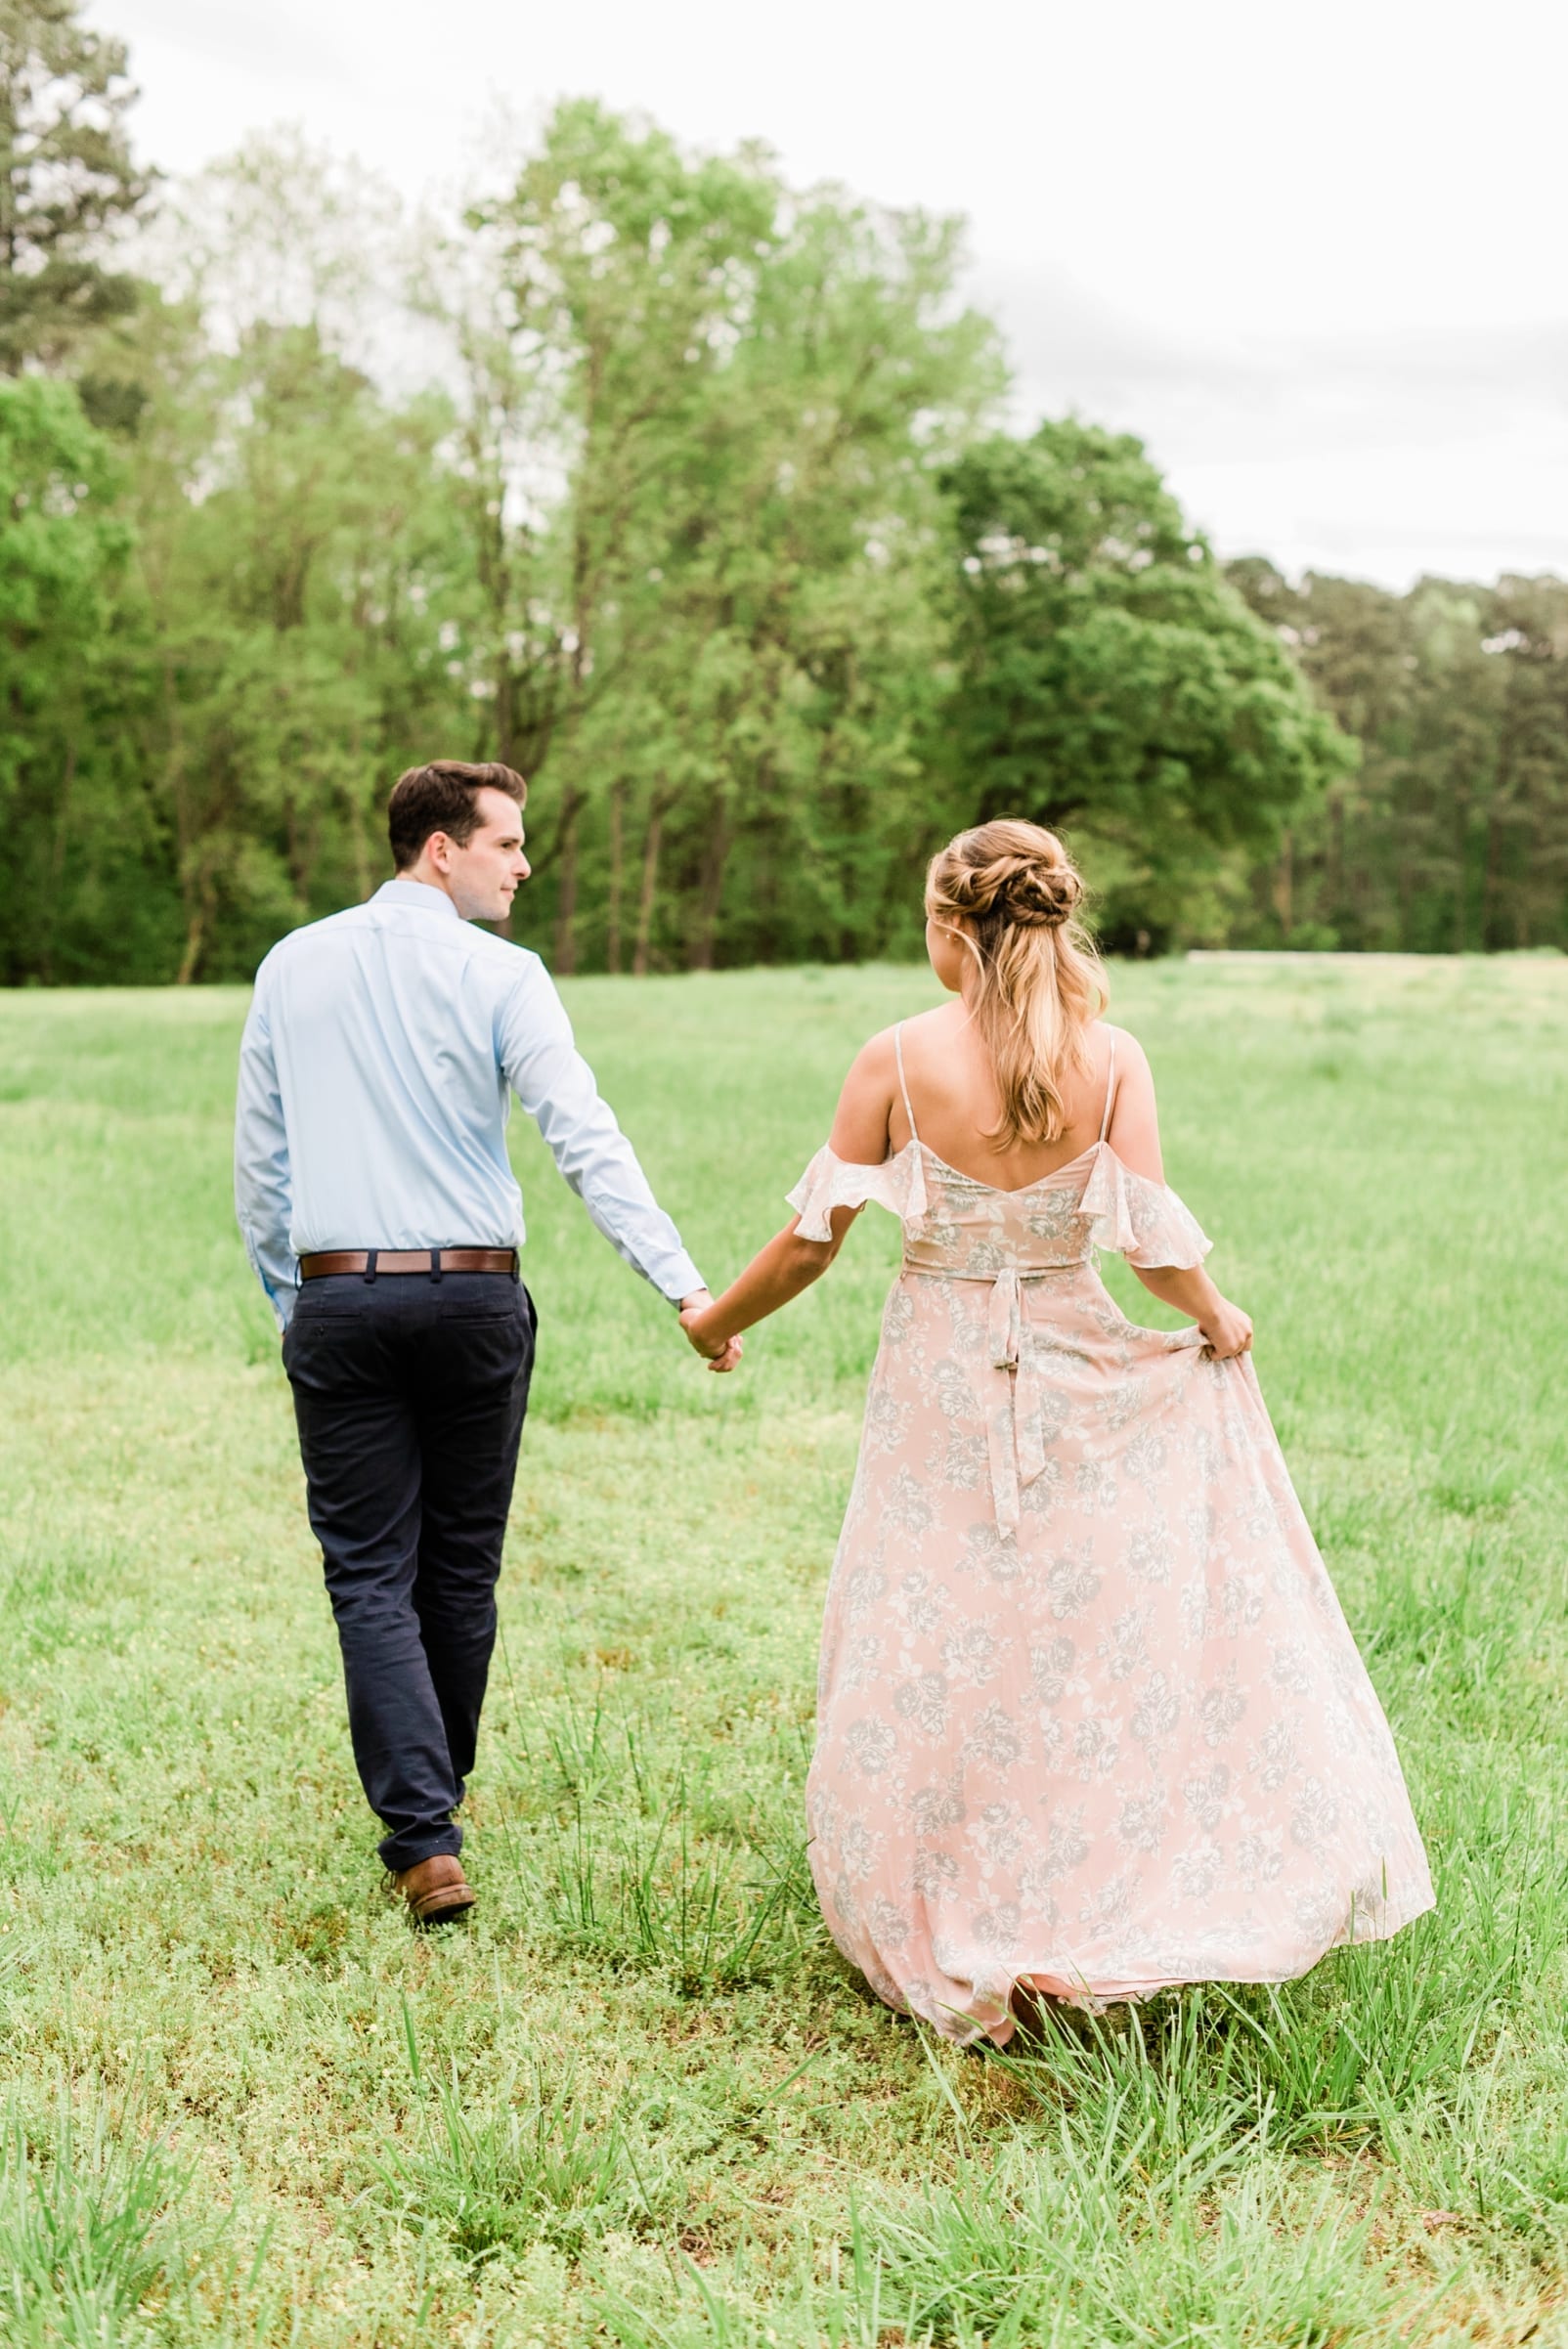 Engagement session with bride a long blush pink dress, holding it up while her groom leads her through a field photo